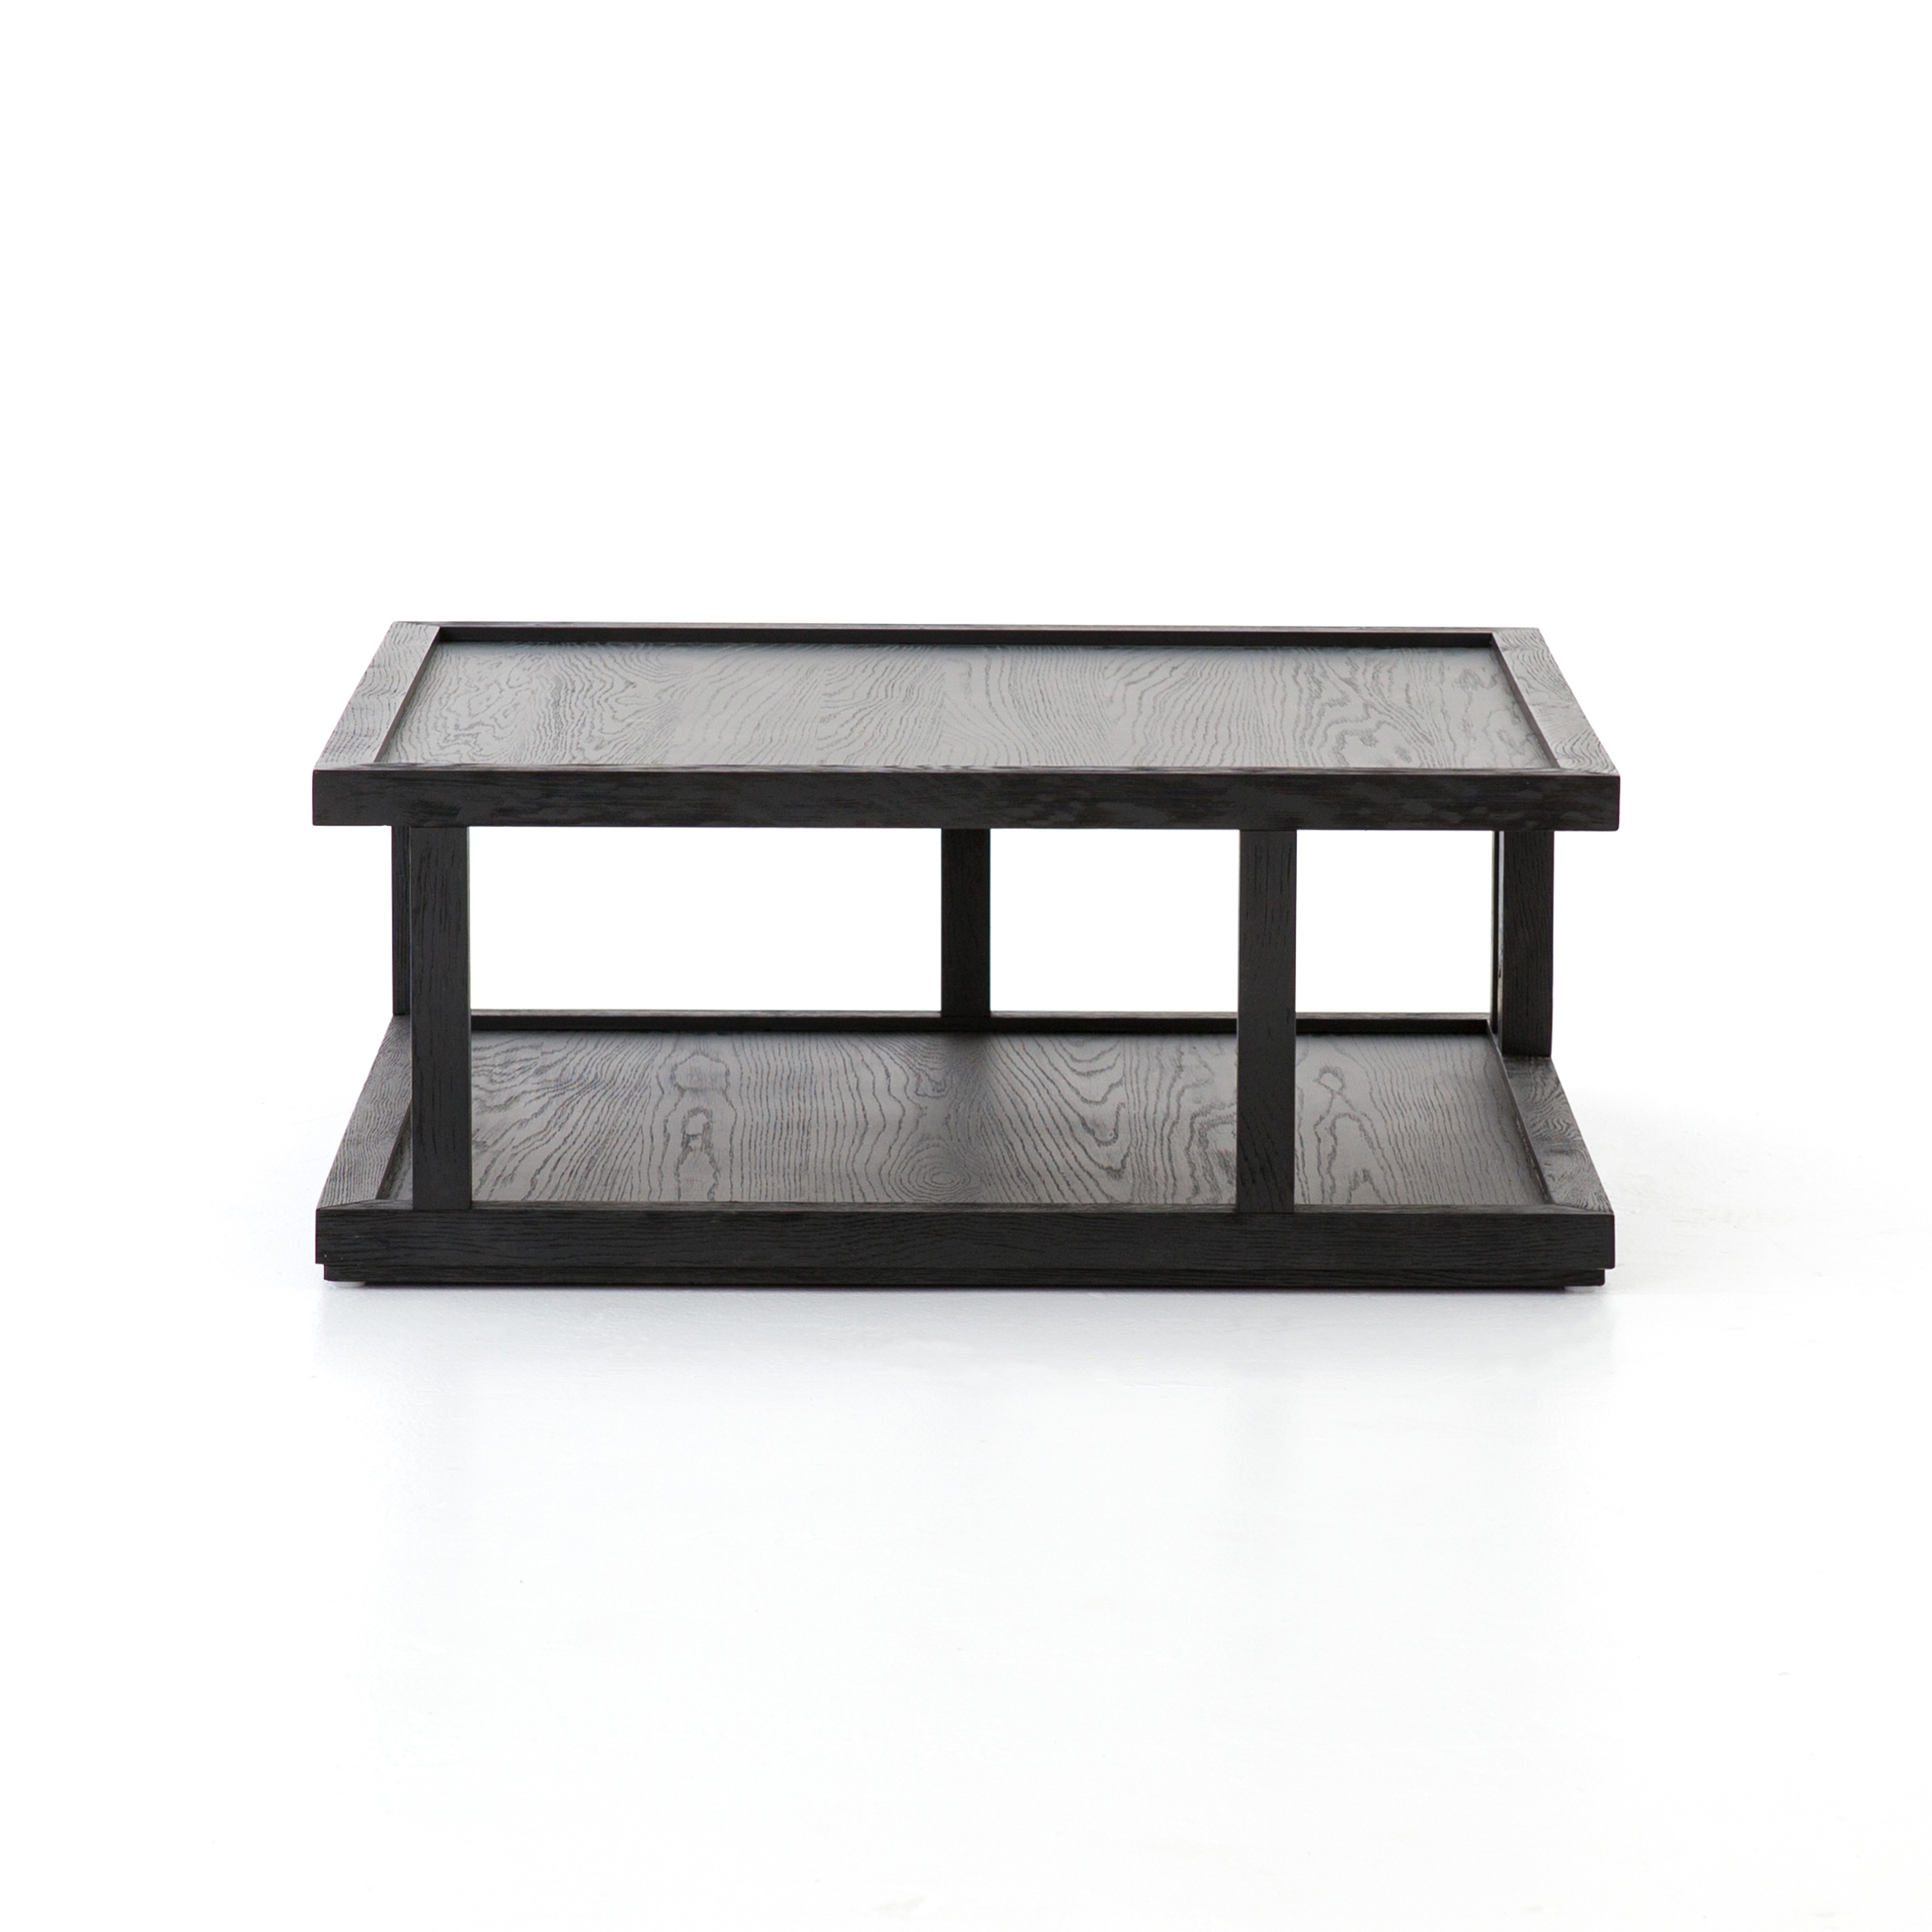 Charley Coffee Table-Drifted Black - Image 13